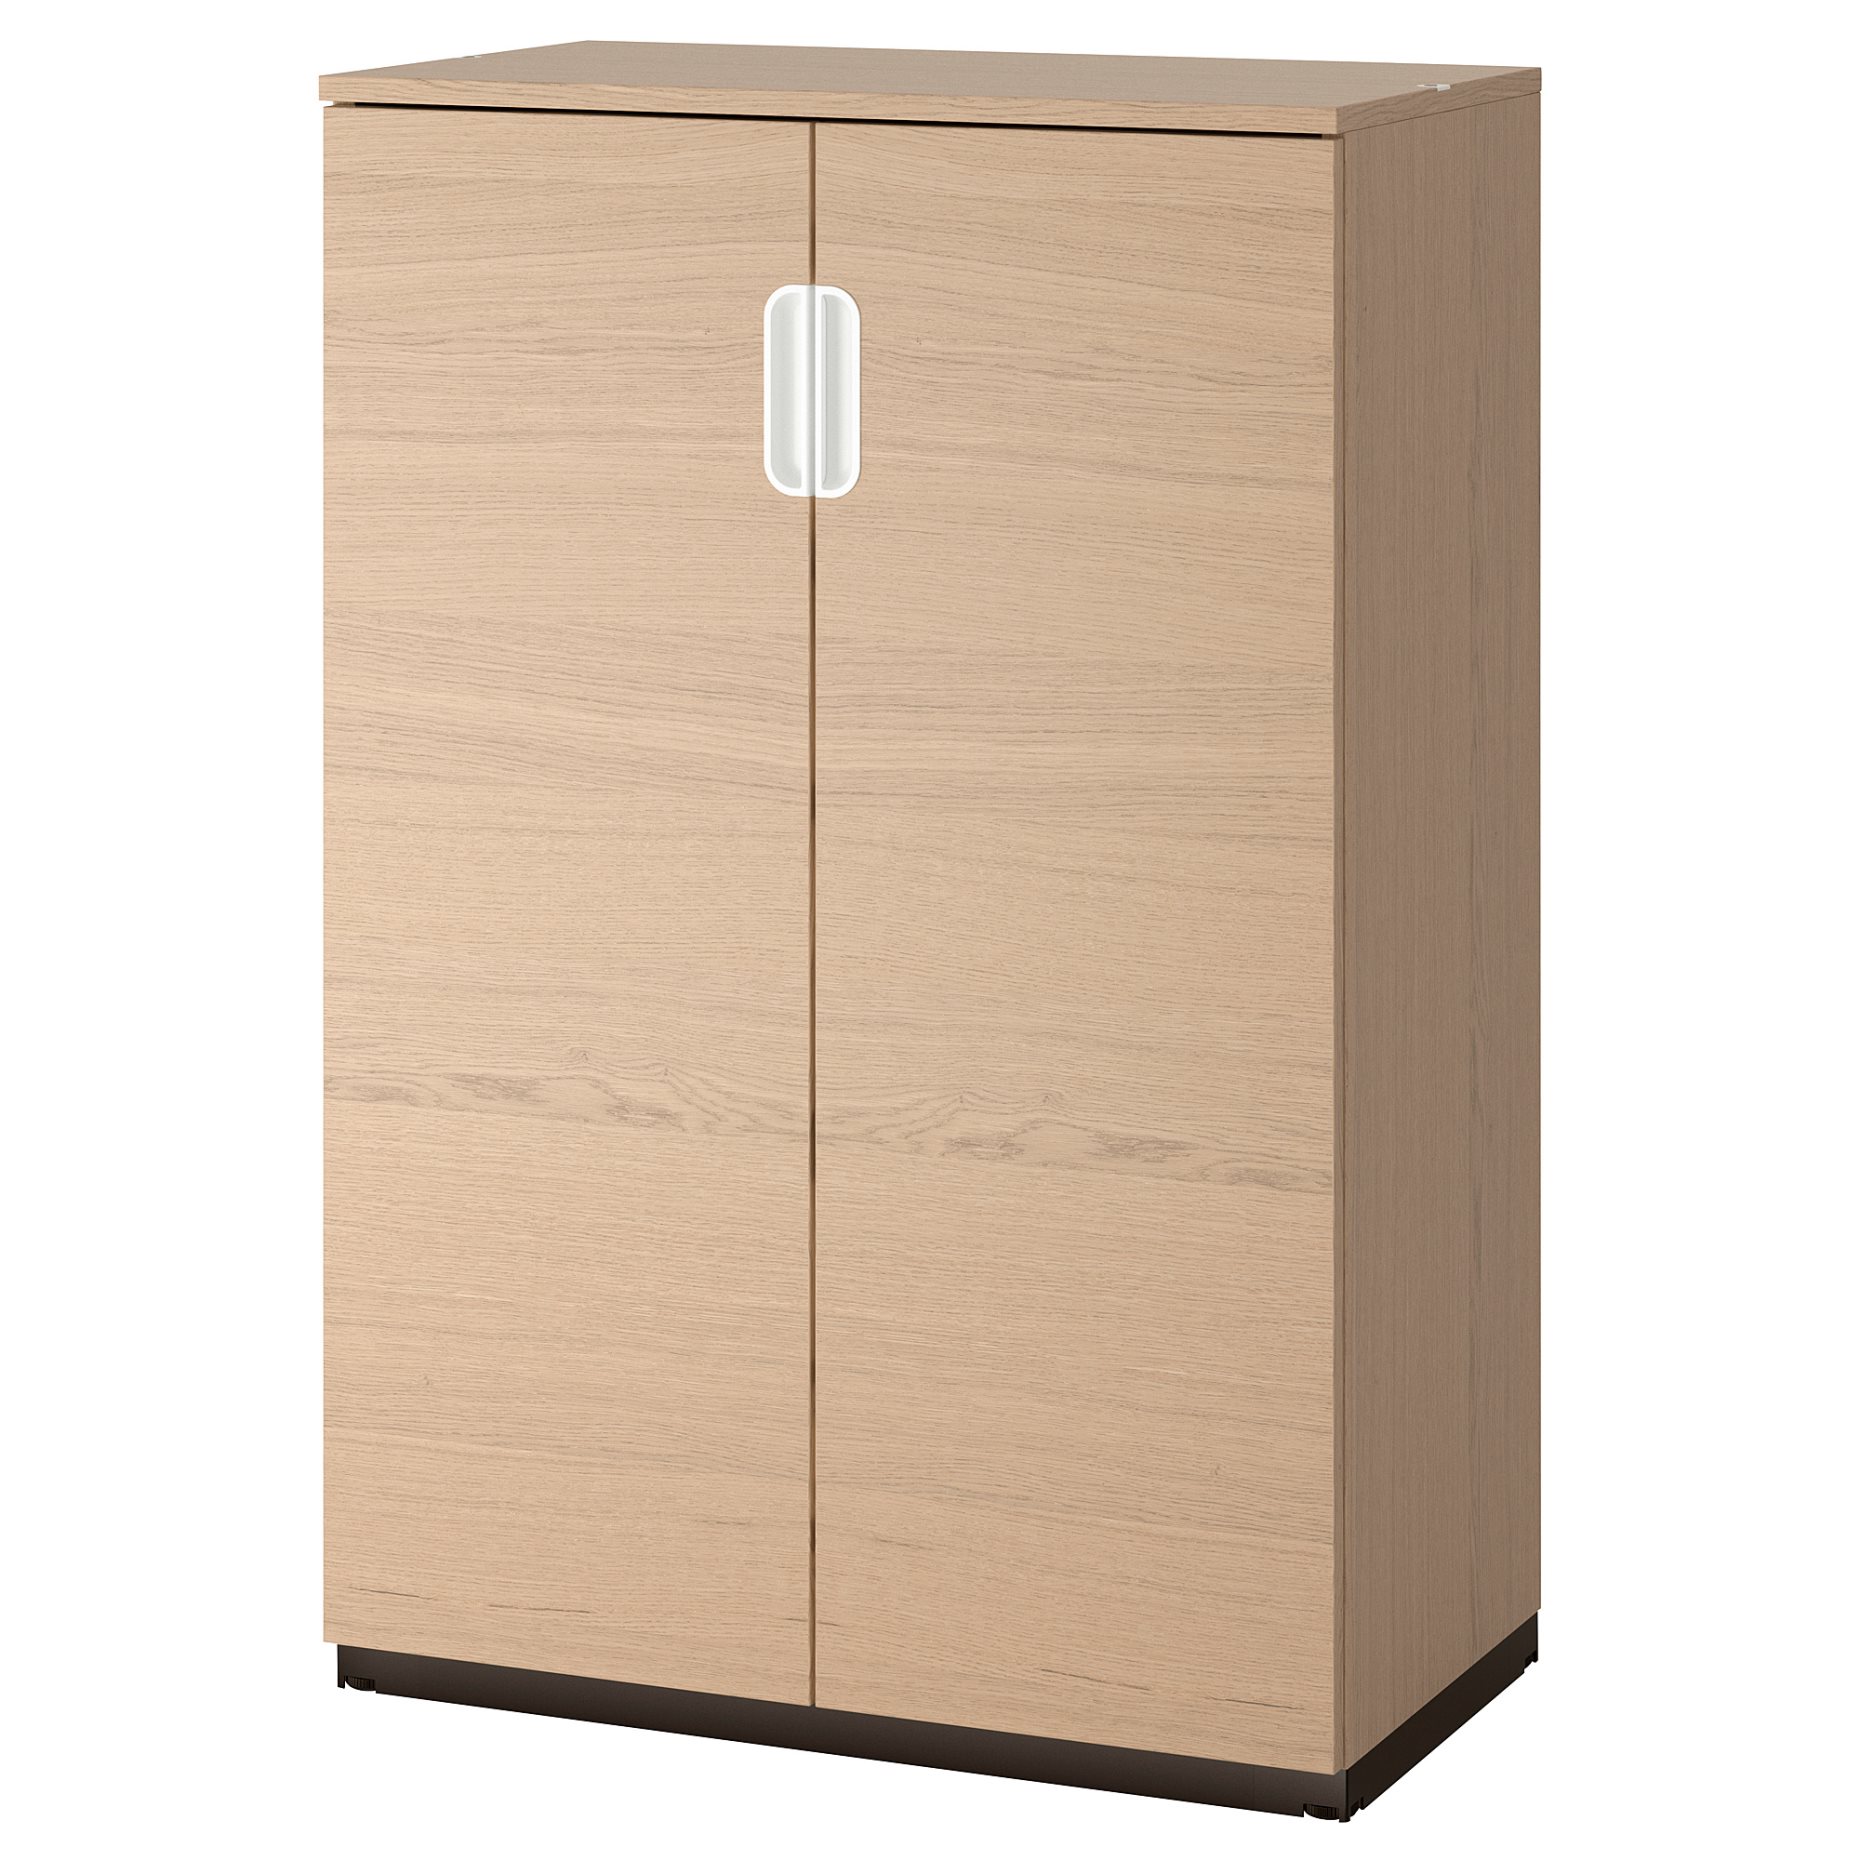 GALANT, cabinet with doors, 903.651.37